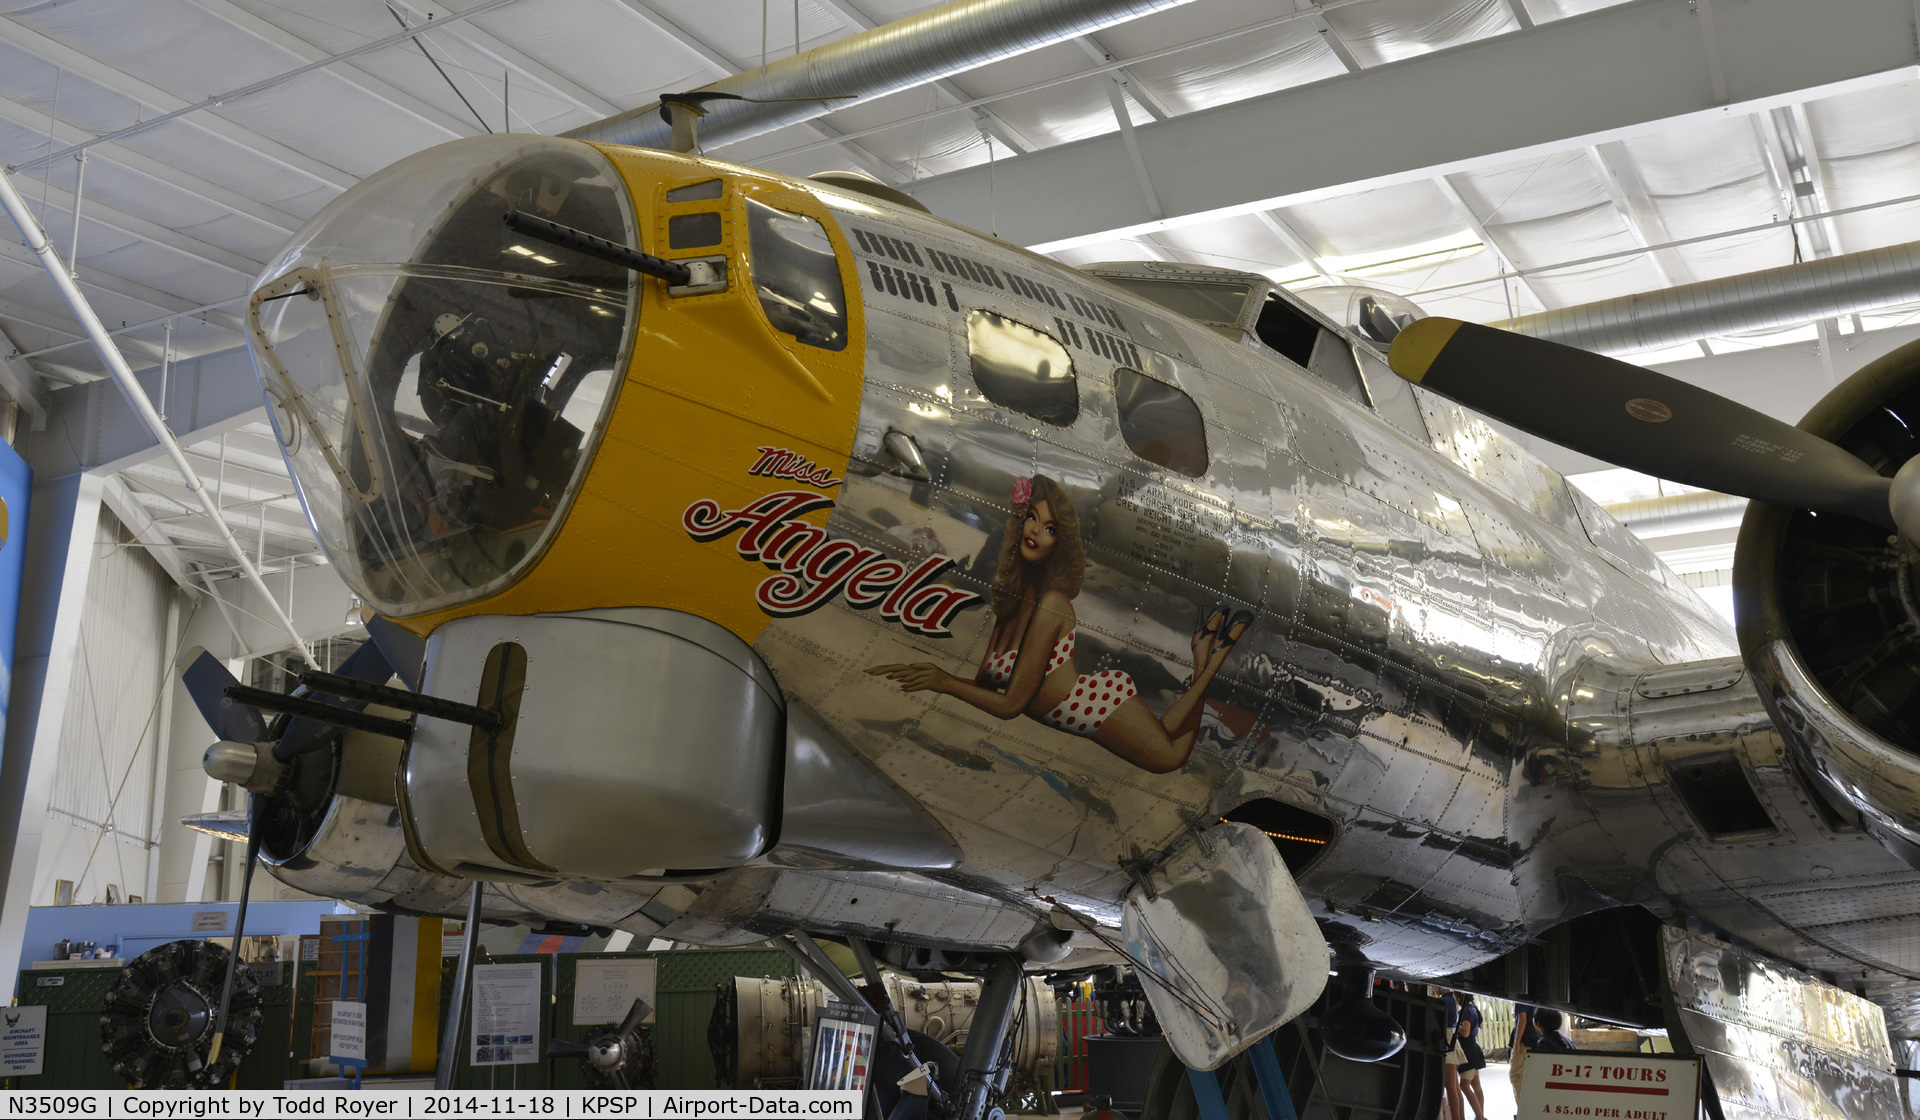 N3509G, 1944 Boeing B-17G Flying Fortress C/N Not found 44-85778, On display at the Palm Springs Air Museum